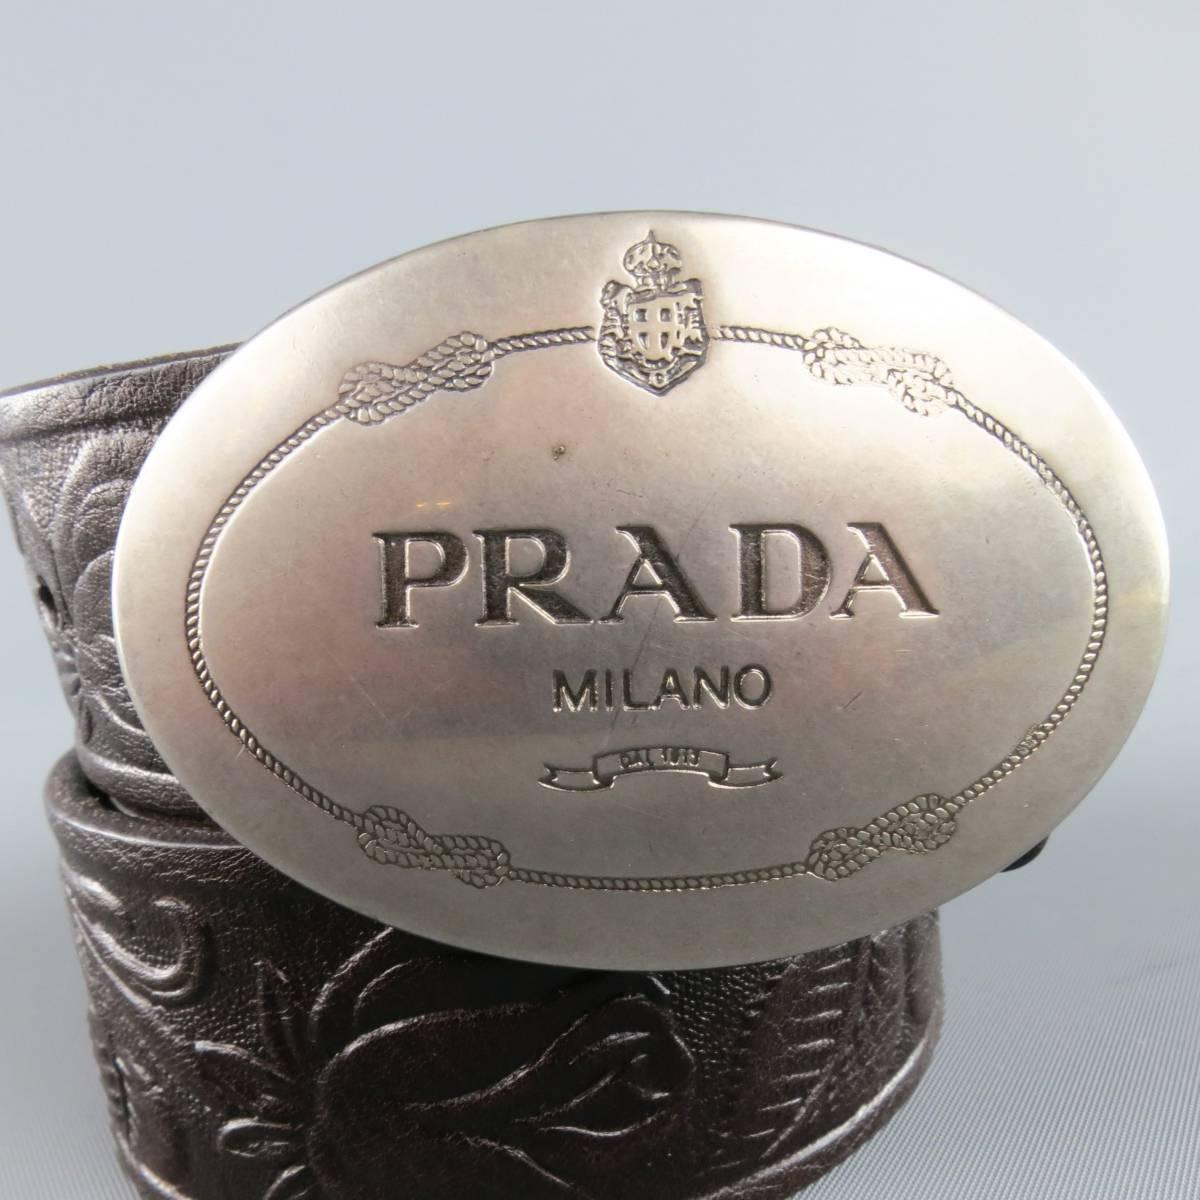 PRADA belt features a floral embossed chocolate brown leather strap and silver tone engraved logo oval shaped buckle. Made in Italy.
 
Good Pre-Owned Condition.
Marked: 8 40/100
 
Length: 47.5 in.
Width: 1.5 in.
Fits: 39-43 in.
Buckle: 3 x 2 in.